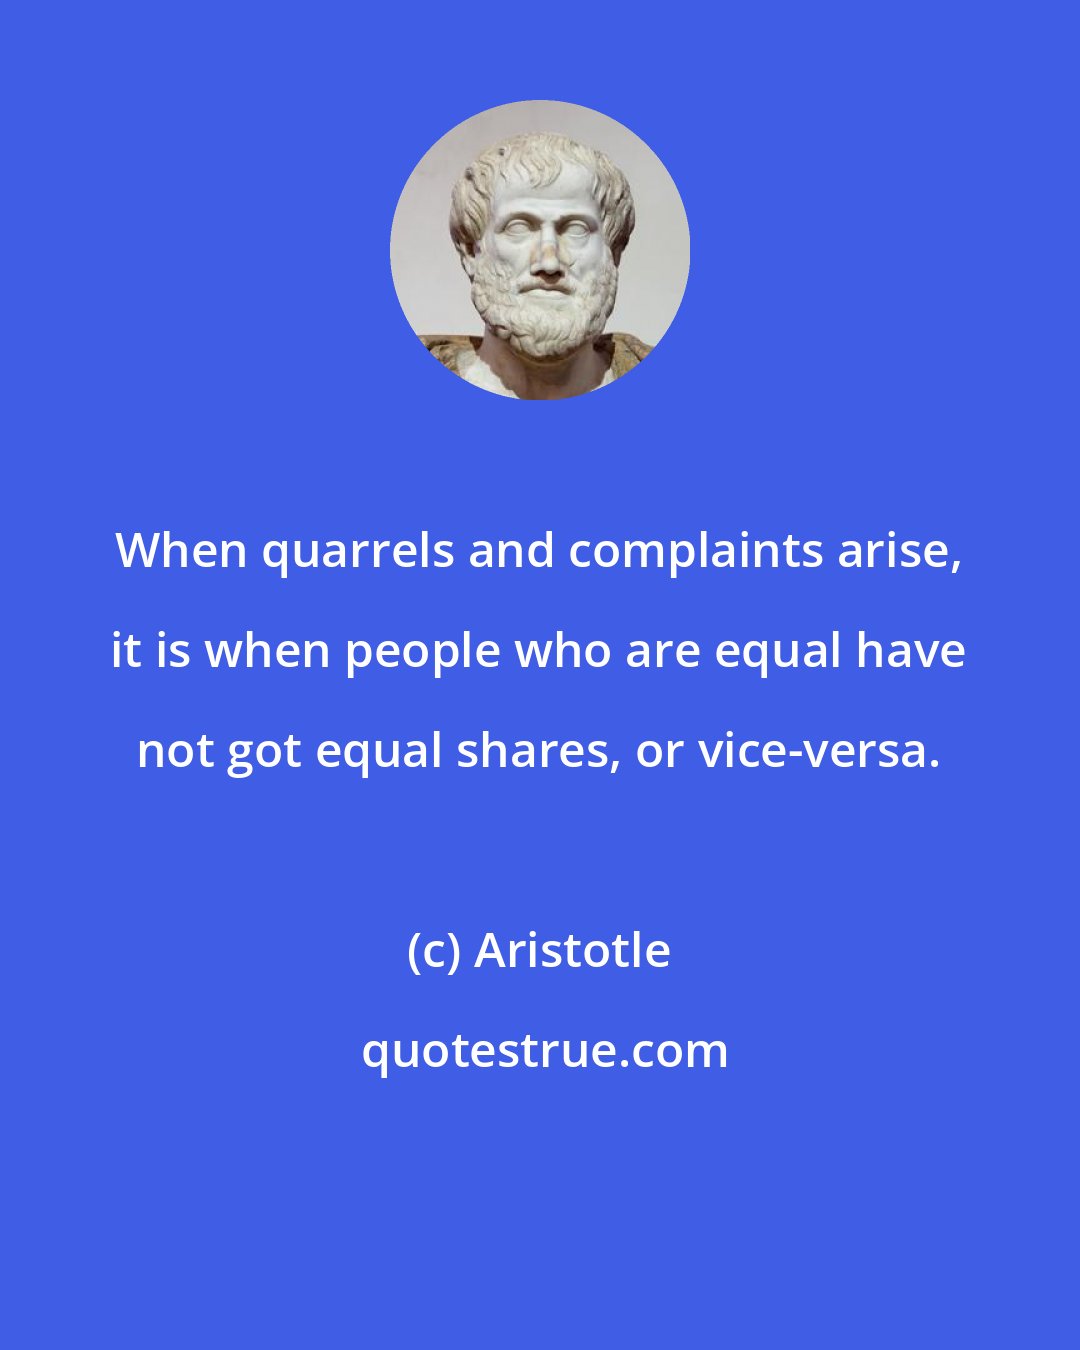 Aristotle: When quarrels and complaints arise, it is when people who are equal have not got equal shares, or vice-versa.